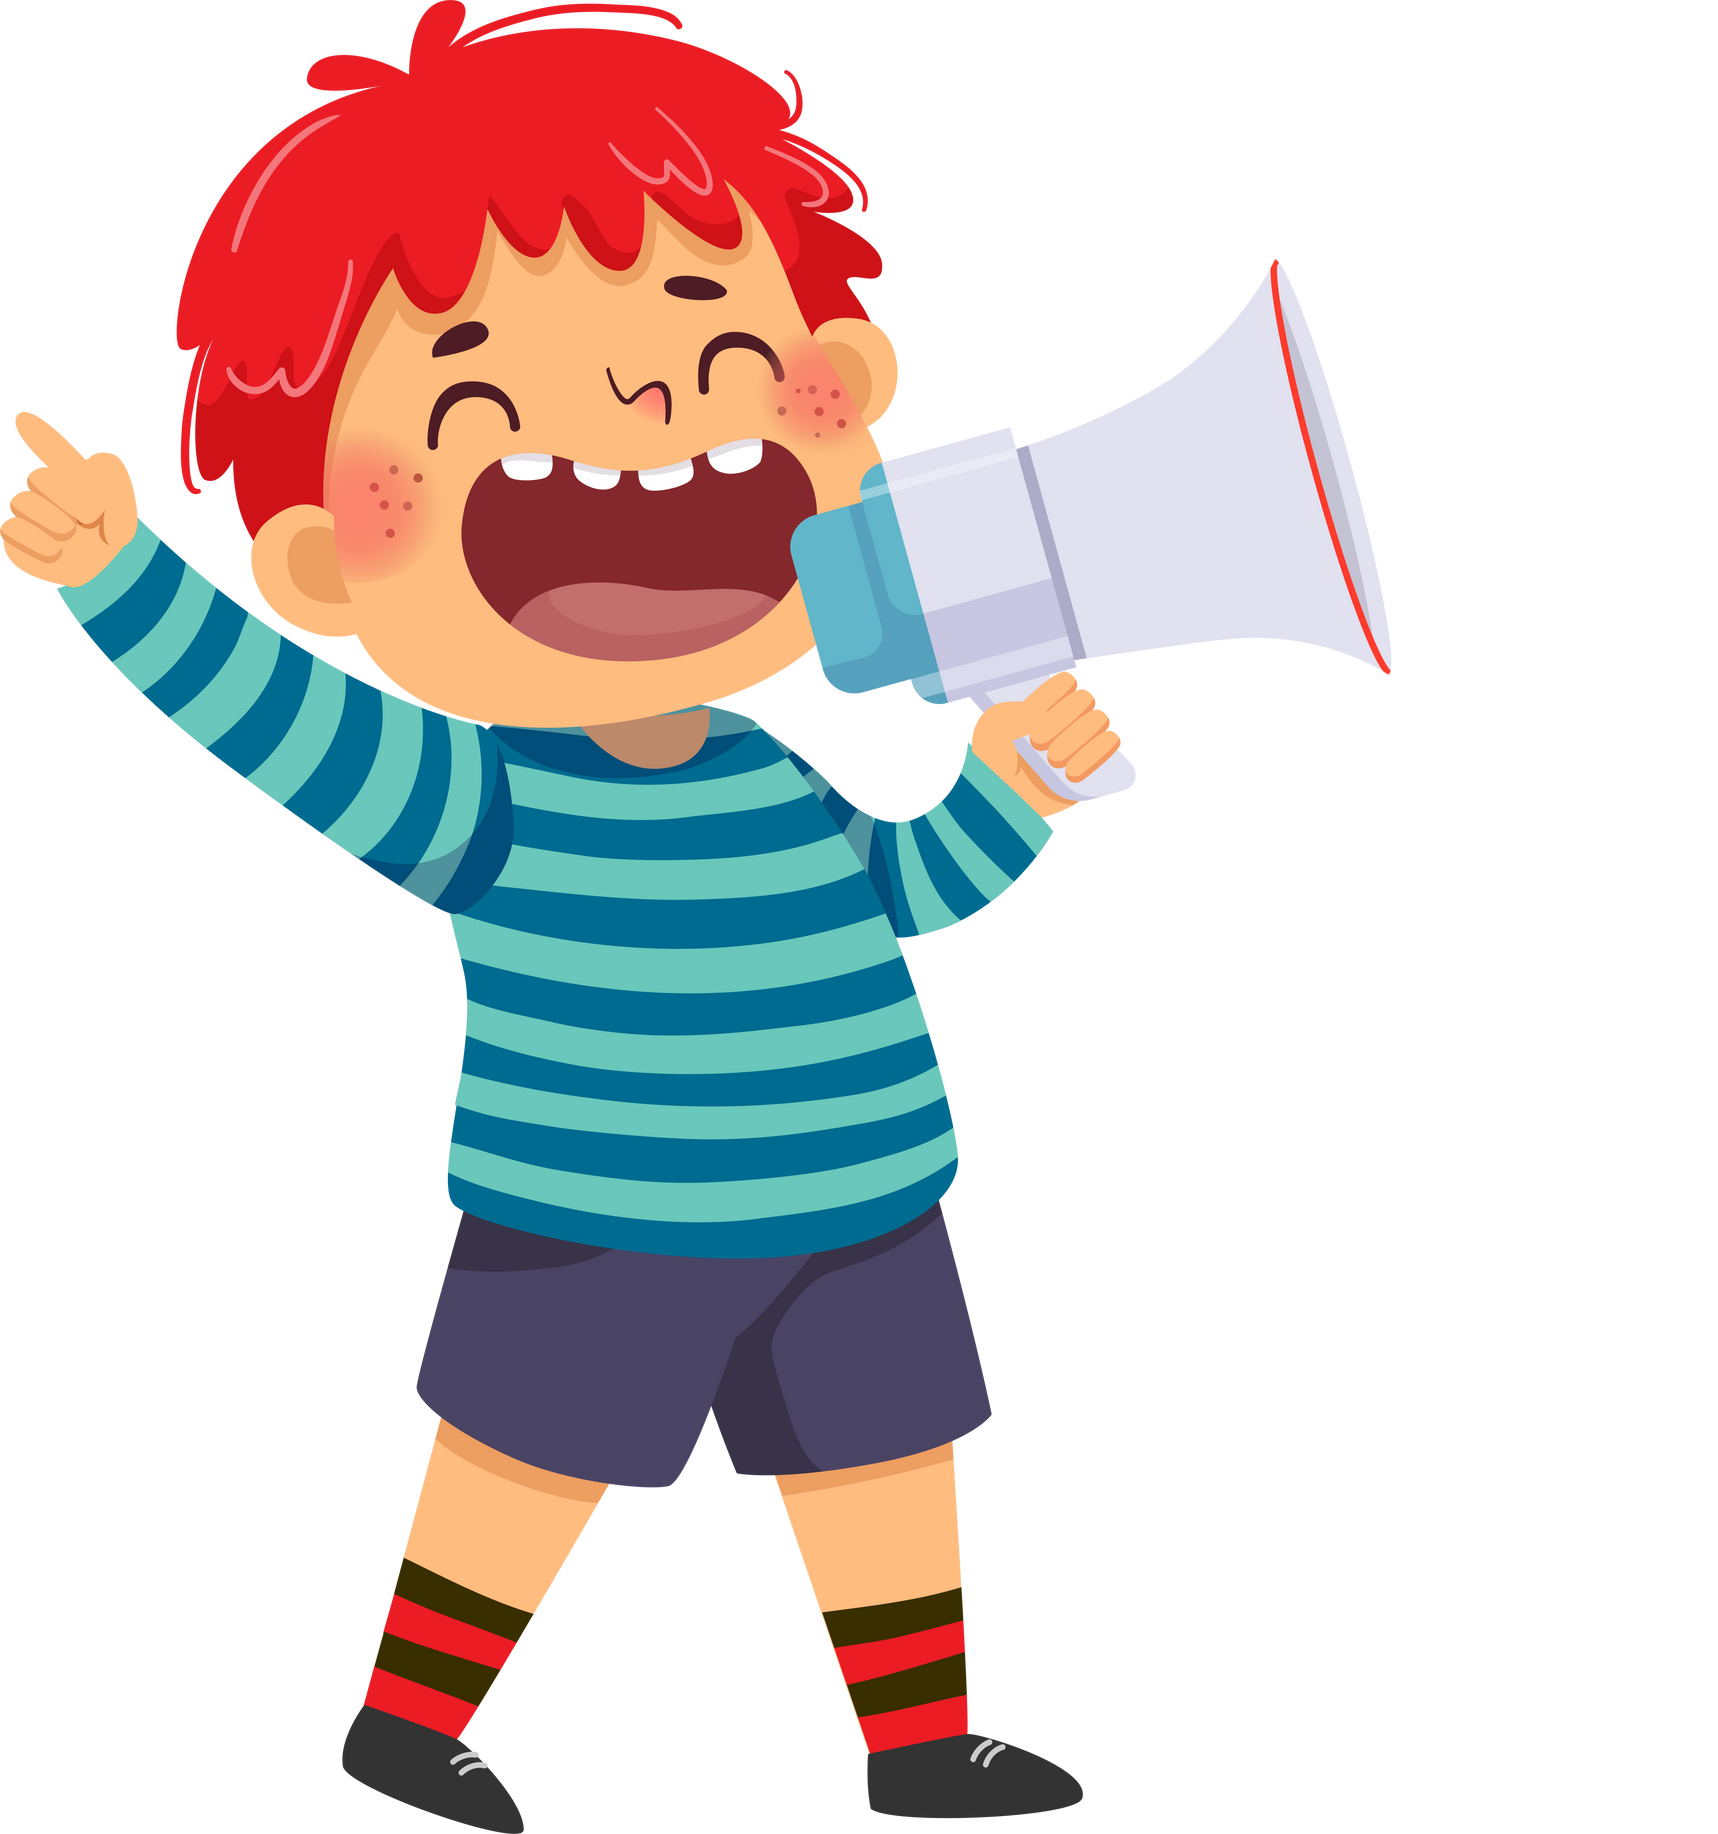 Cartoon boy screaming with megaphone and pointing finger up